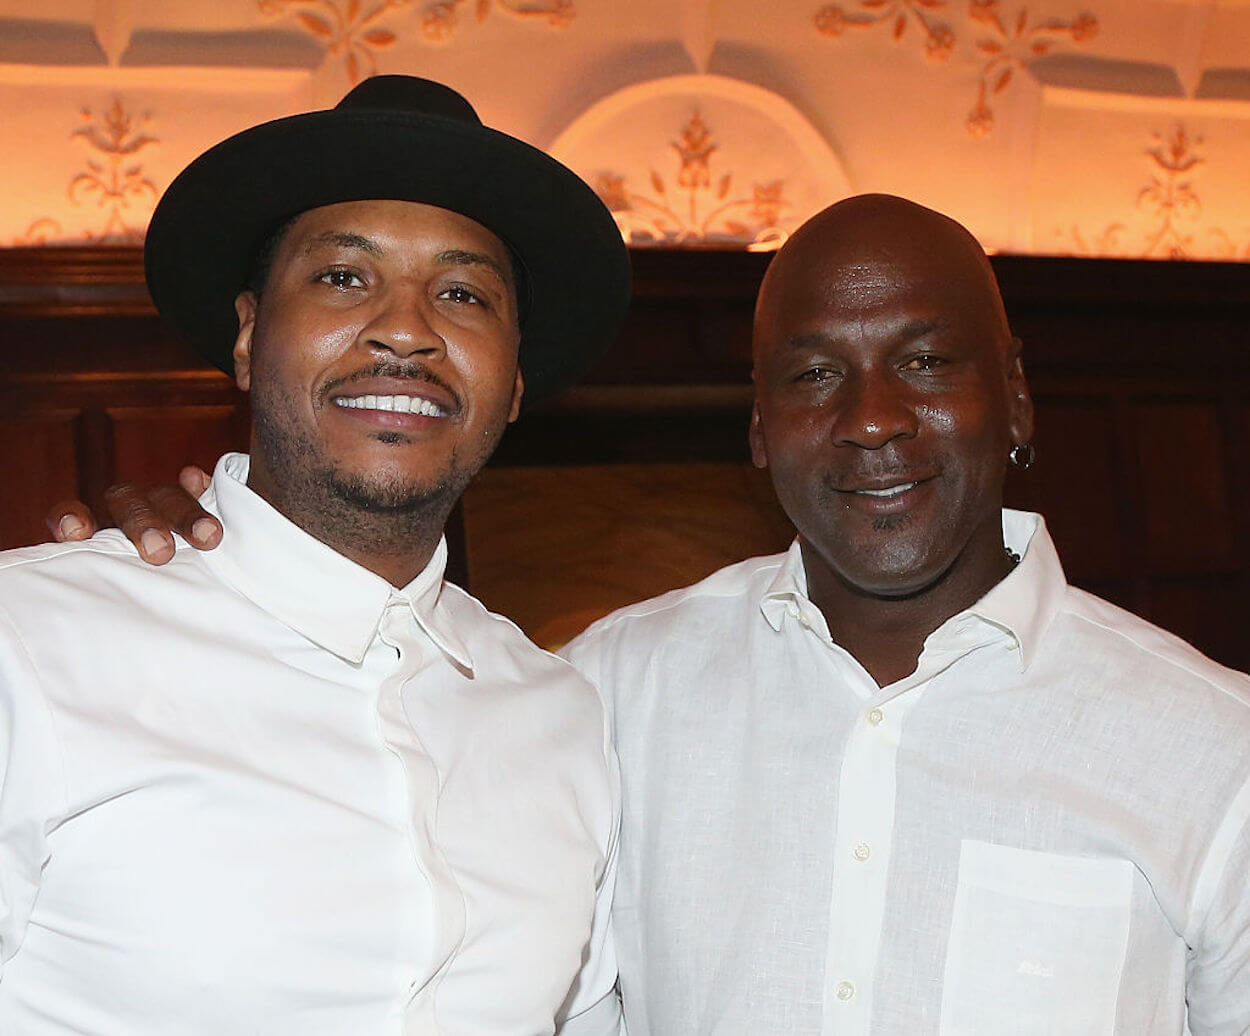 Carmelo Anthony (L) and Michael Jordan (R) pose at a 2016 event.